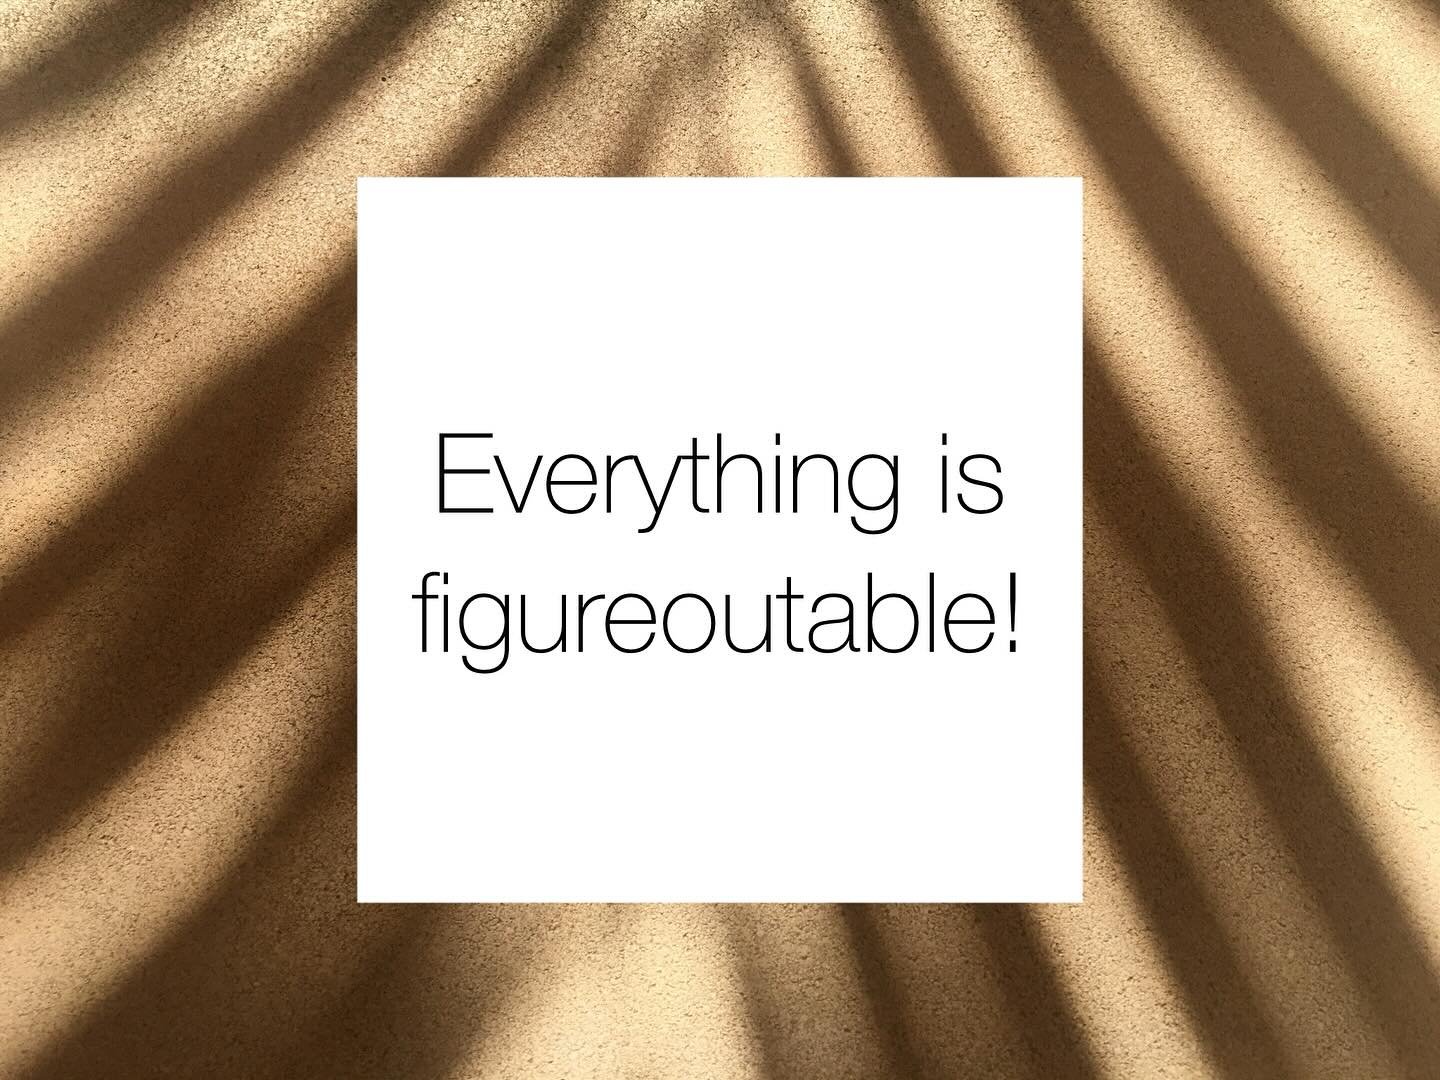 This is my philosophy for my design business and for my personal life. Figureoutable is probably not a word but I believe there can be a solution for everything. It may not be exactly as we planned but something can be worked out. My team all has thi